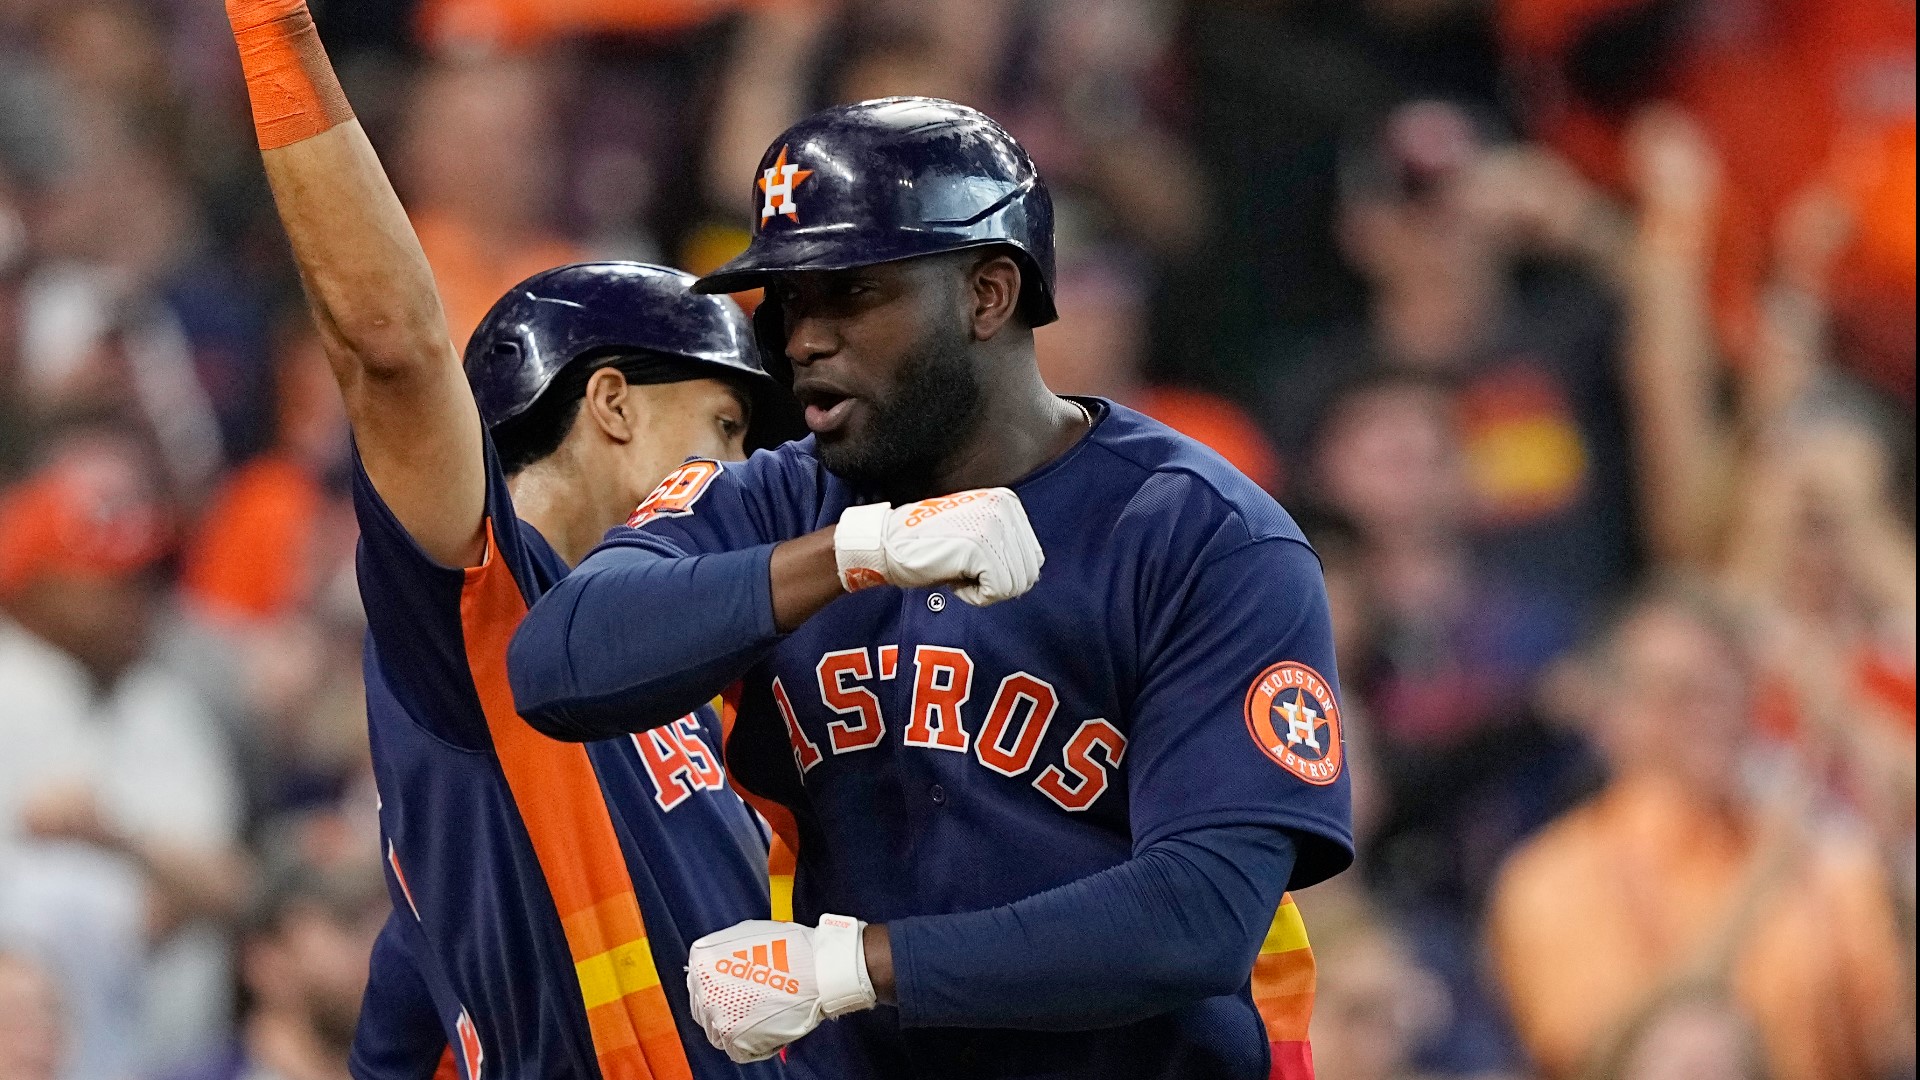 The Astros took a commanding 2-0 lead in their ALDS series with the Seattle Mariners.